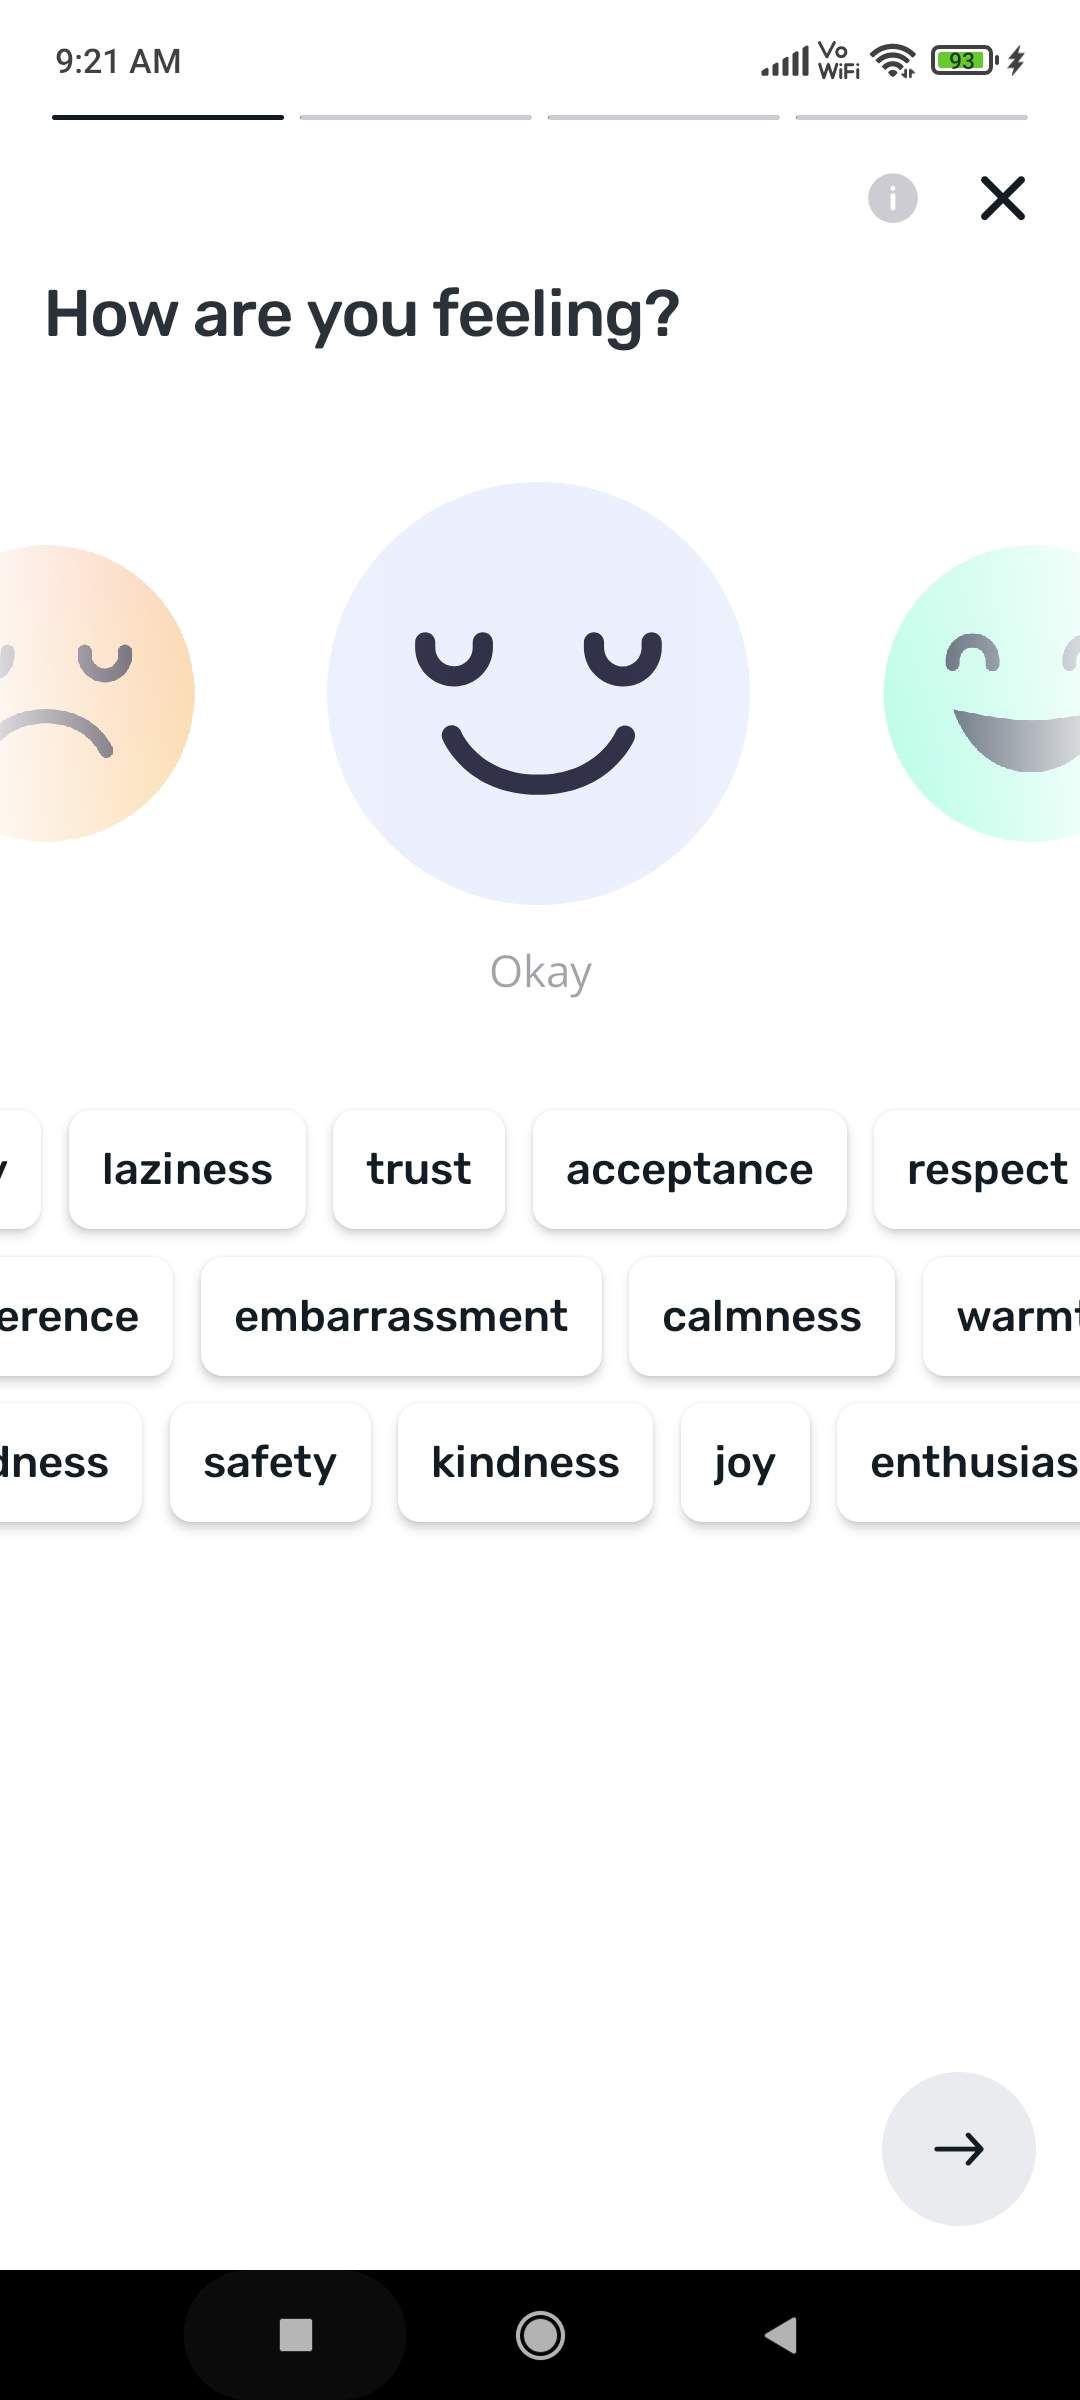 You can quickly log your mood and associated feelings with a few taps, and choose to write a note with it or not